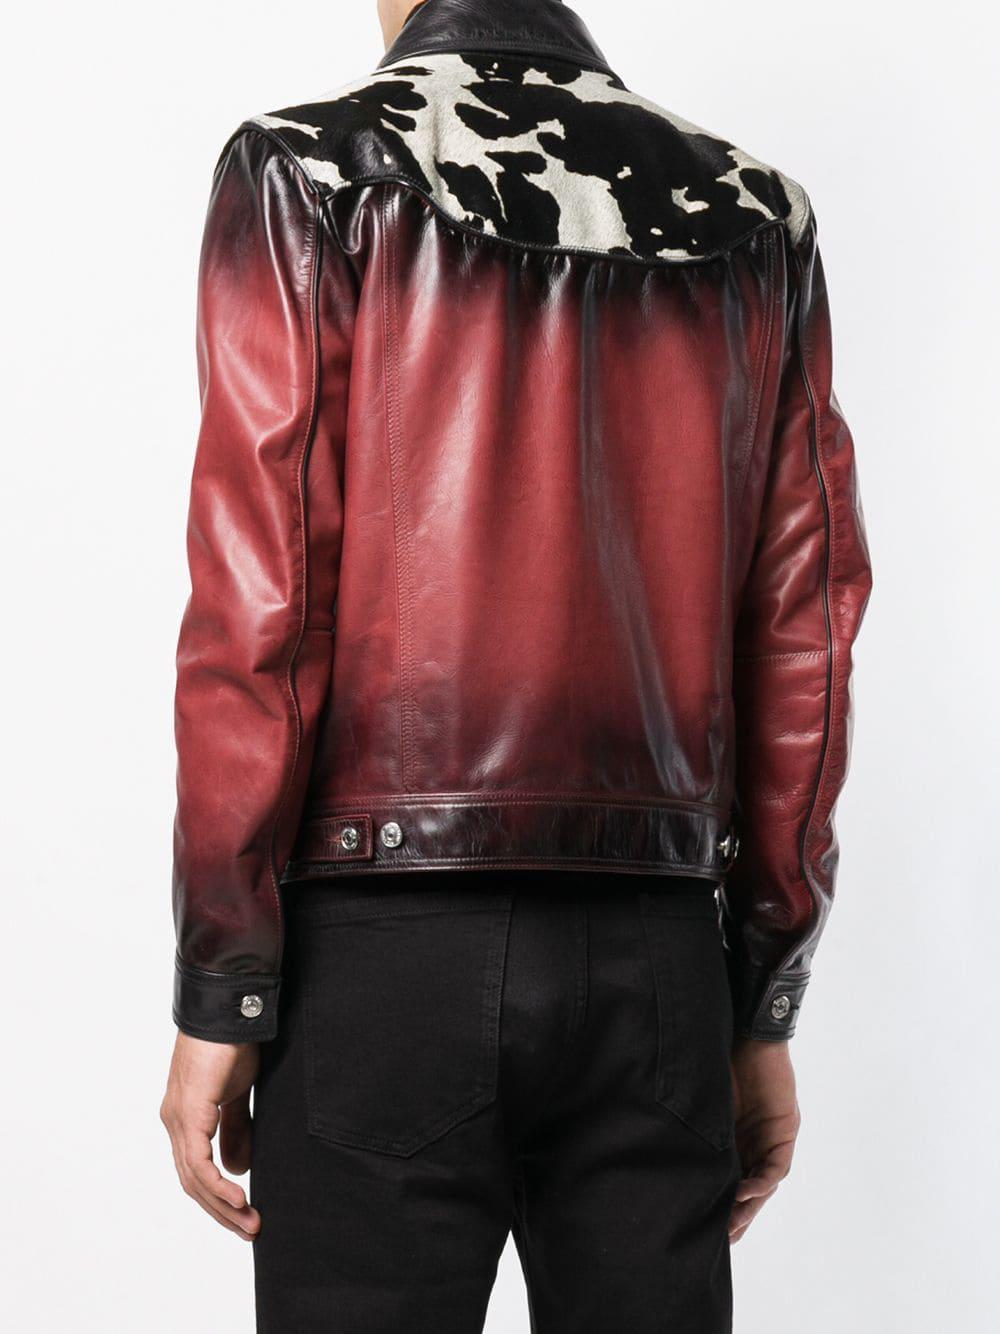 DSquared² Ombre Leather Jacket in Red for Men - Lyst